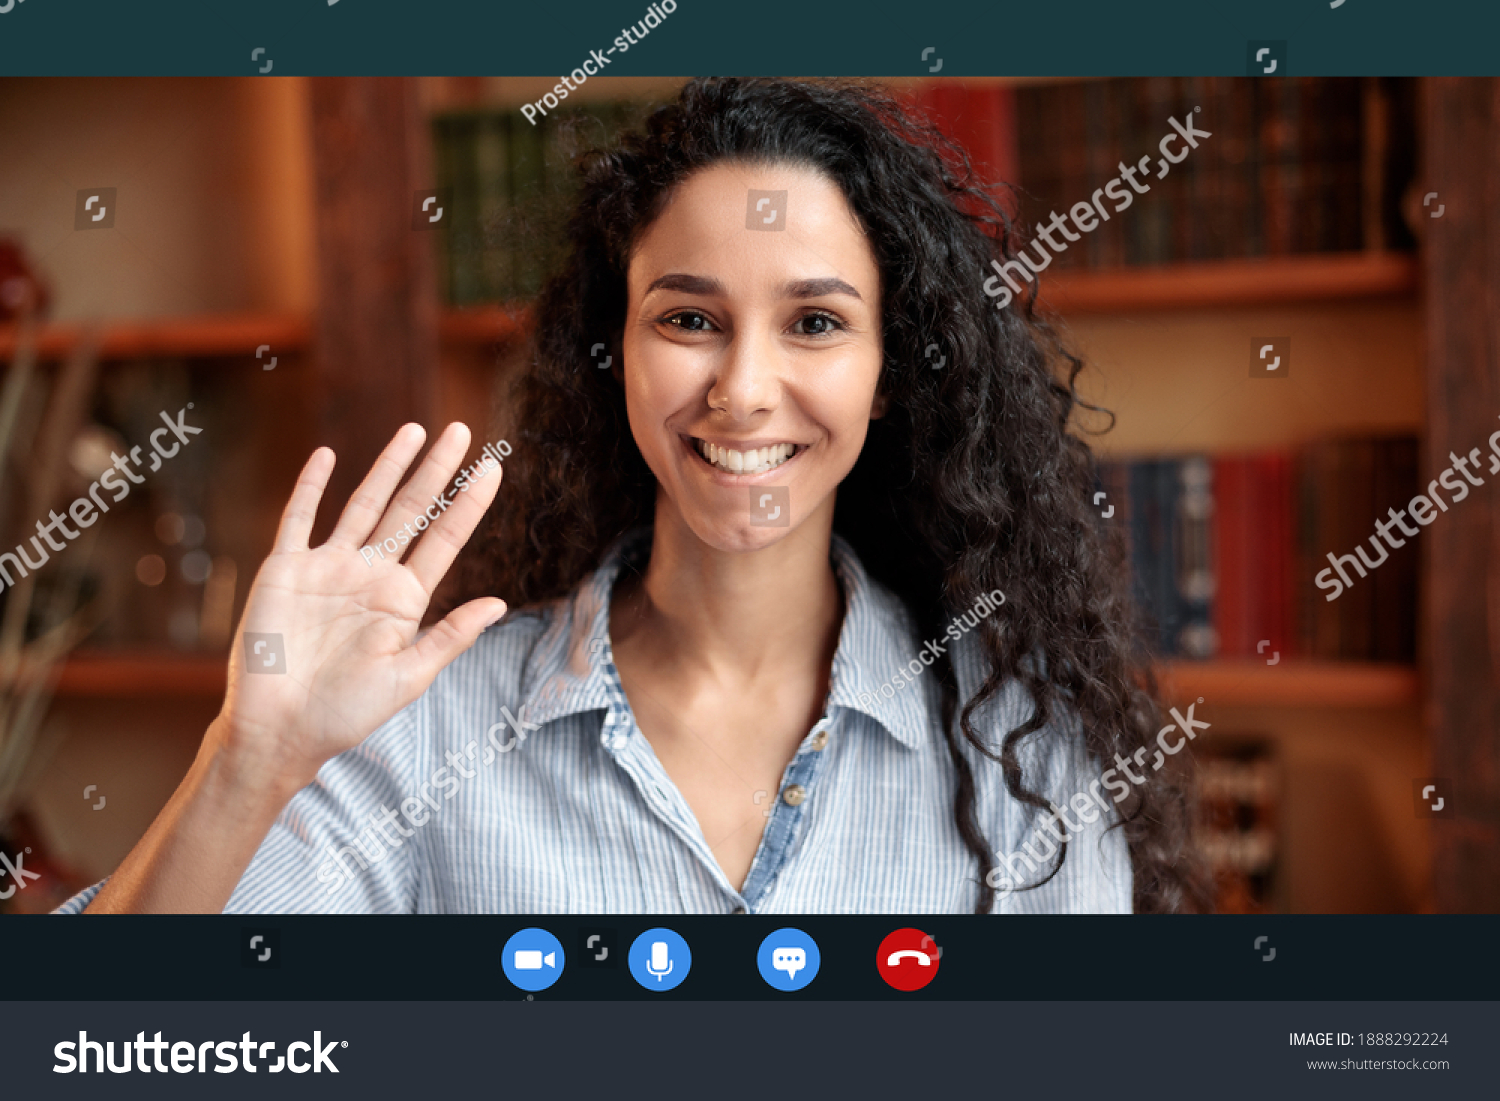 Head shot of smiling young female employee worker waving hand to webcam, greeting colleagues at remote brainstorm online meeting, woman using computer video call software app, laptop screen view #1888292224